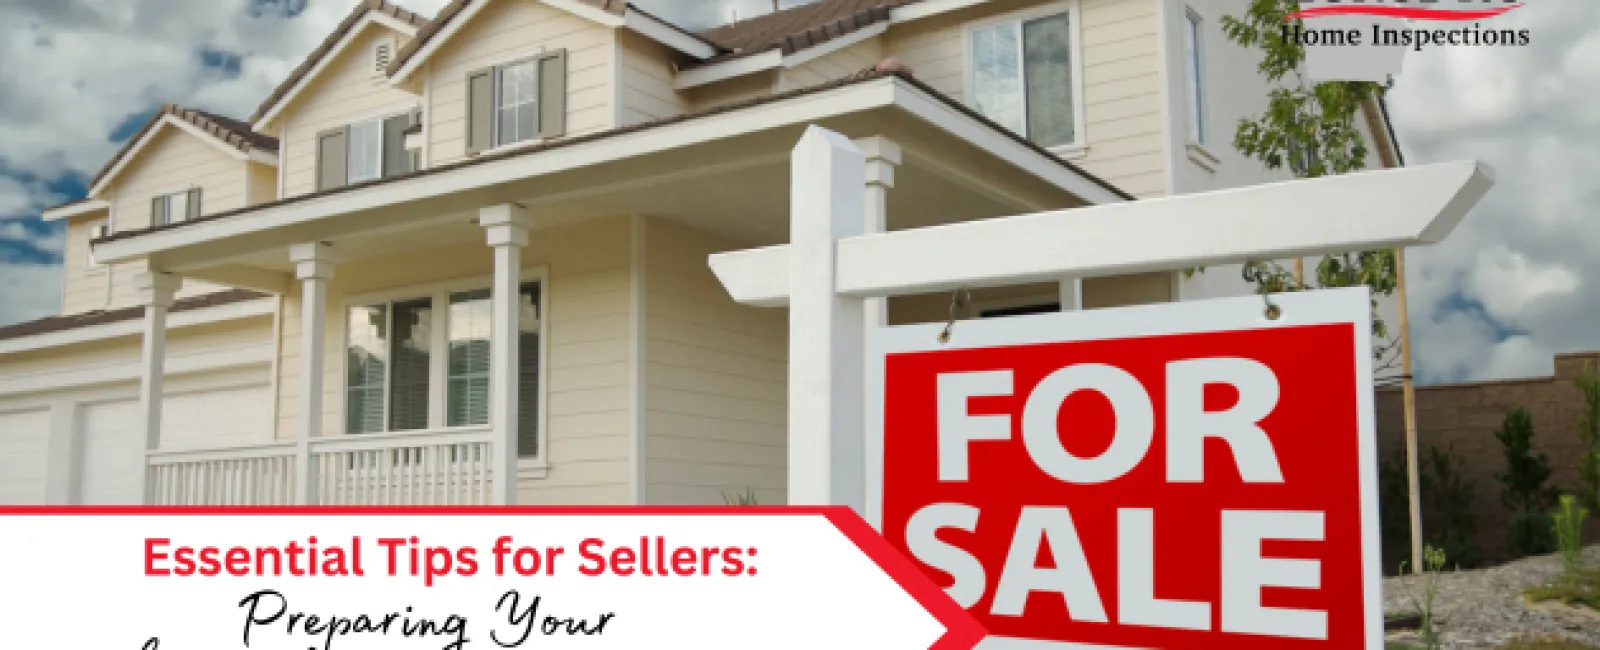 Essential Tips for Sellers: Preparing Your North and South Carolina Home for Inspection